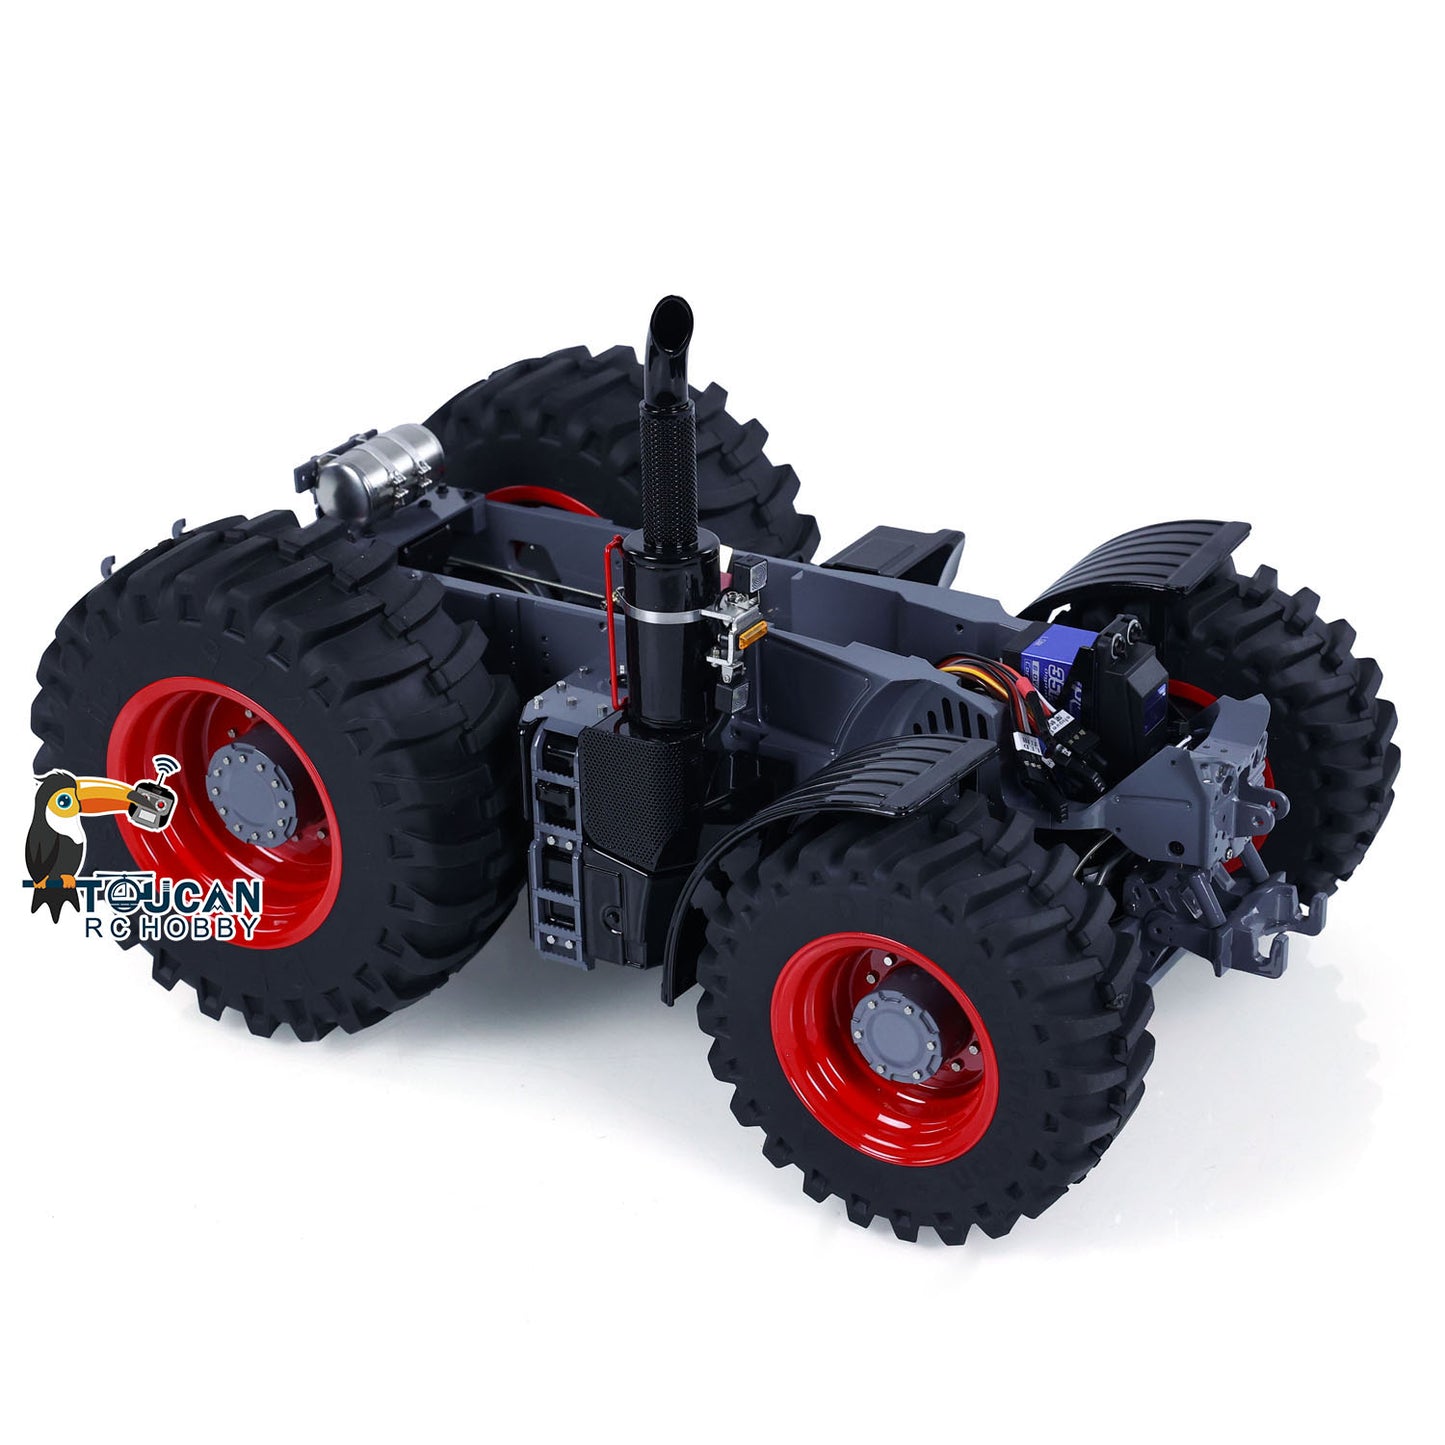 In Stock Metal Chassis 4X4 for 1/16 LESU 1050 RC Tractors DIY Radio Control Car Model Assembled Unpainted Accessory Differential Lock